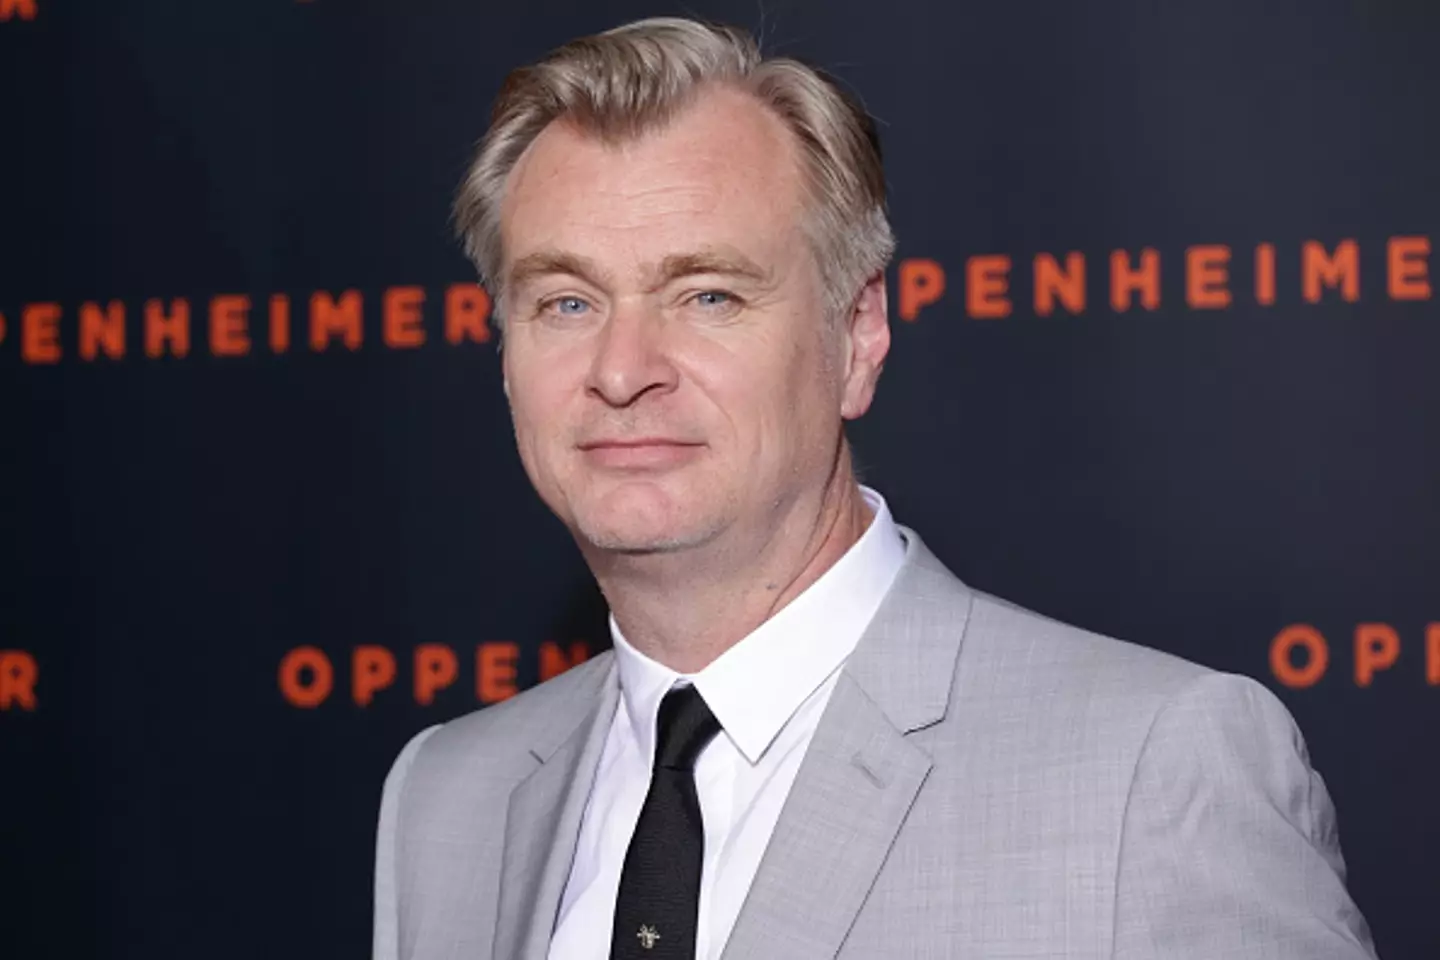 Christopher Nolan has urged people to buy the Oppenheimer Blu-ray.